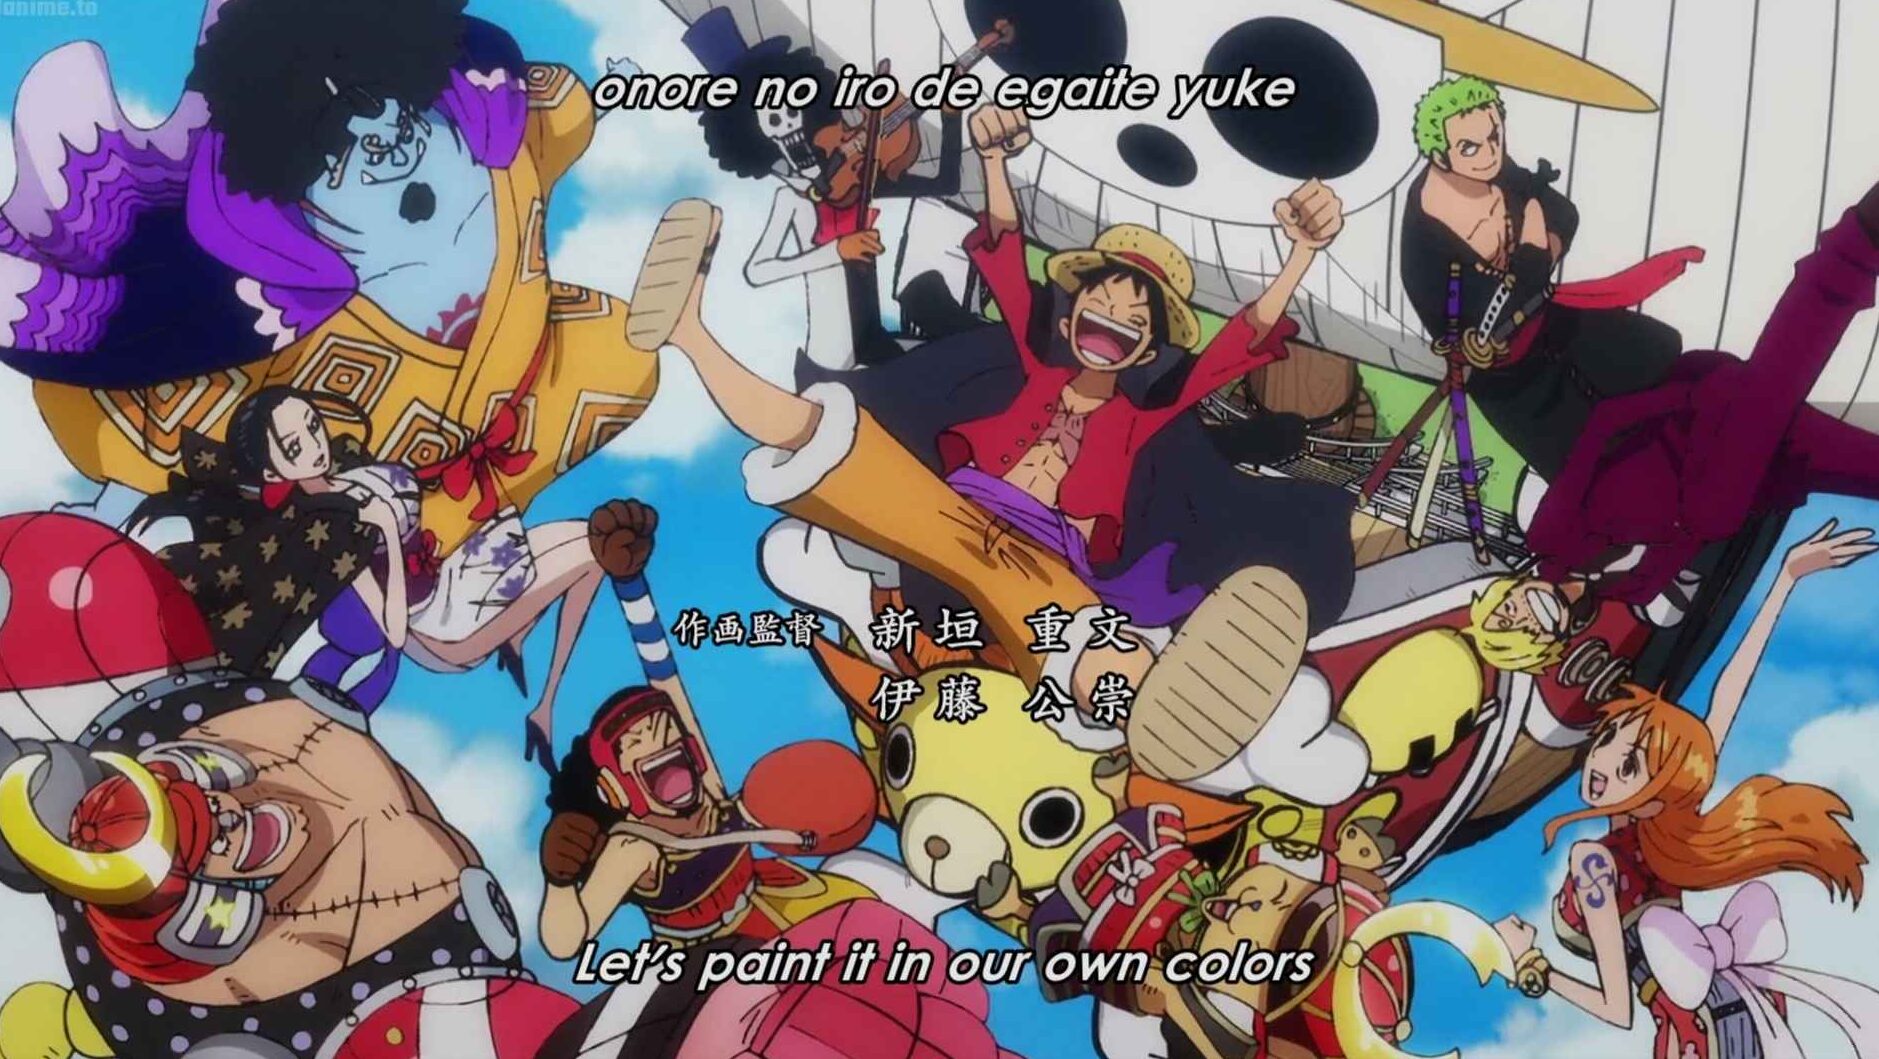  One Piece, invites you on a once in a lifetime opportunity to sail to the Great Pirate Era